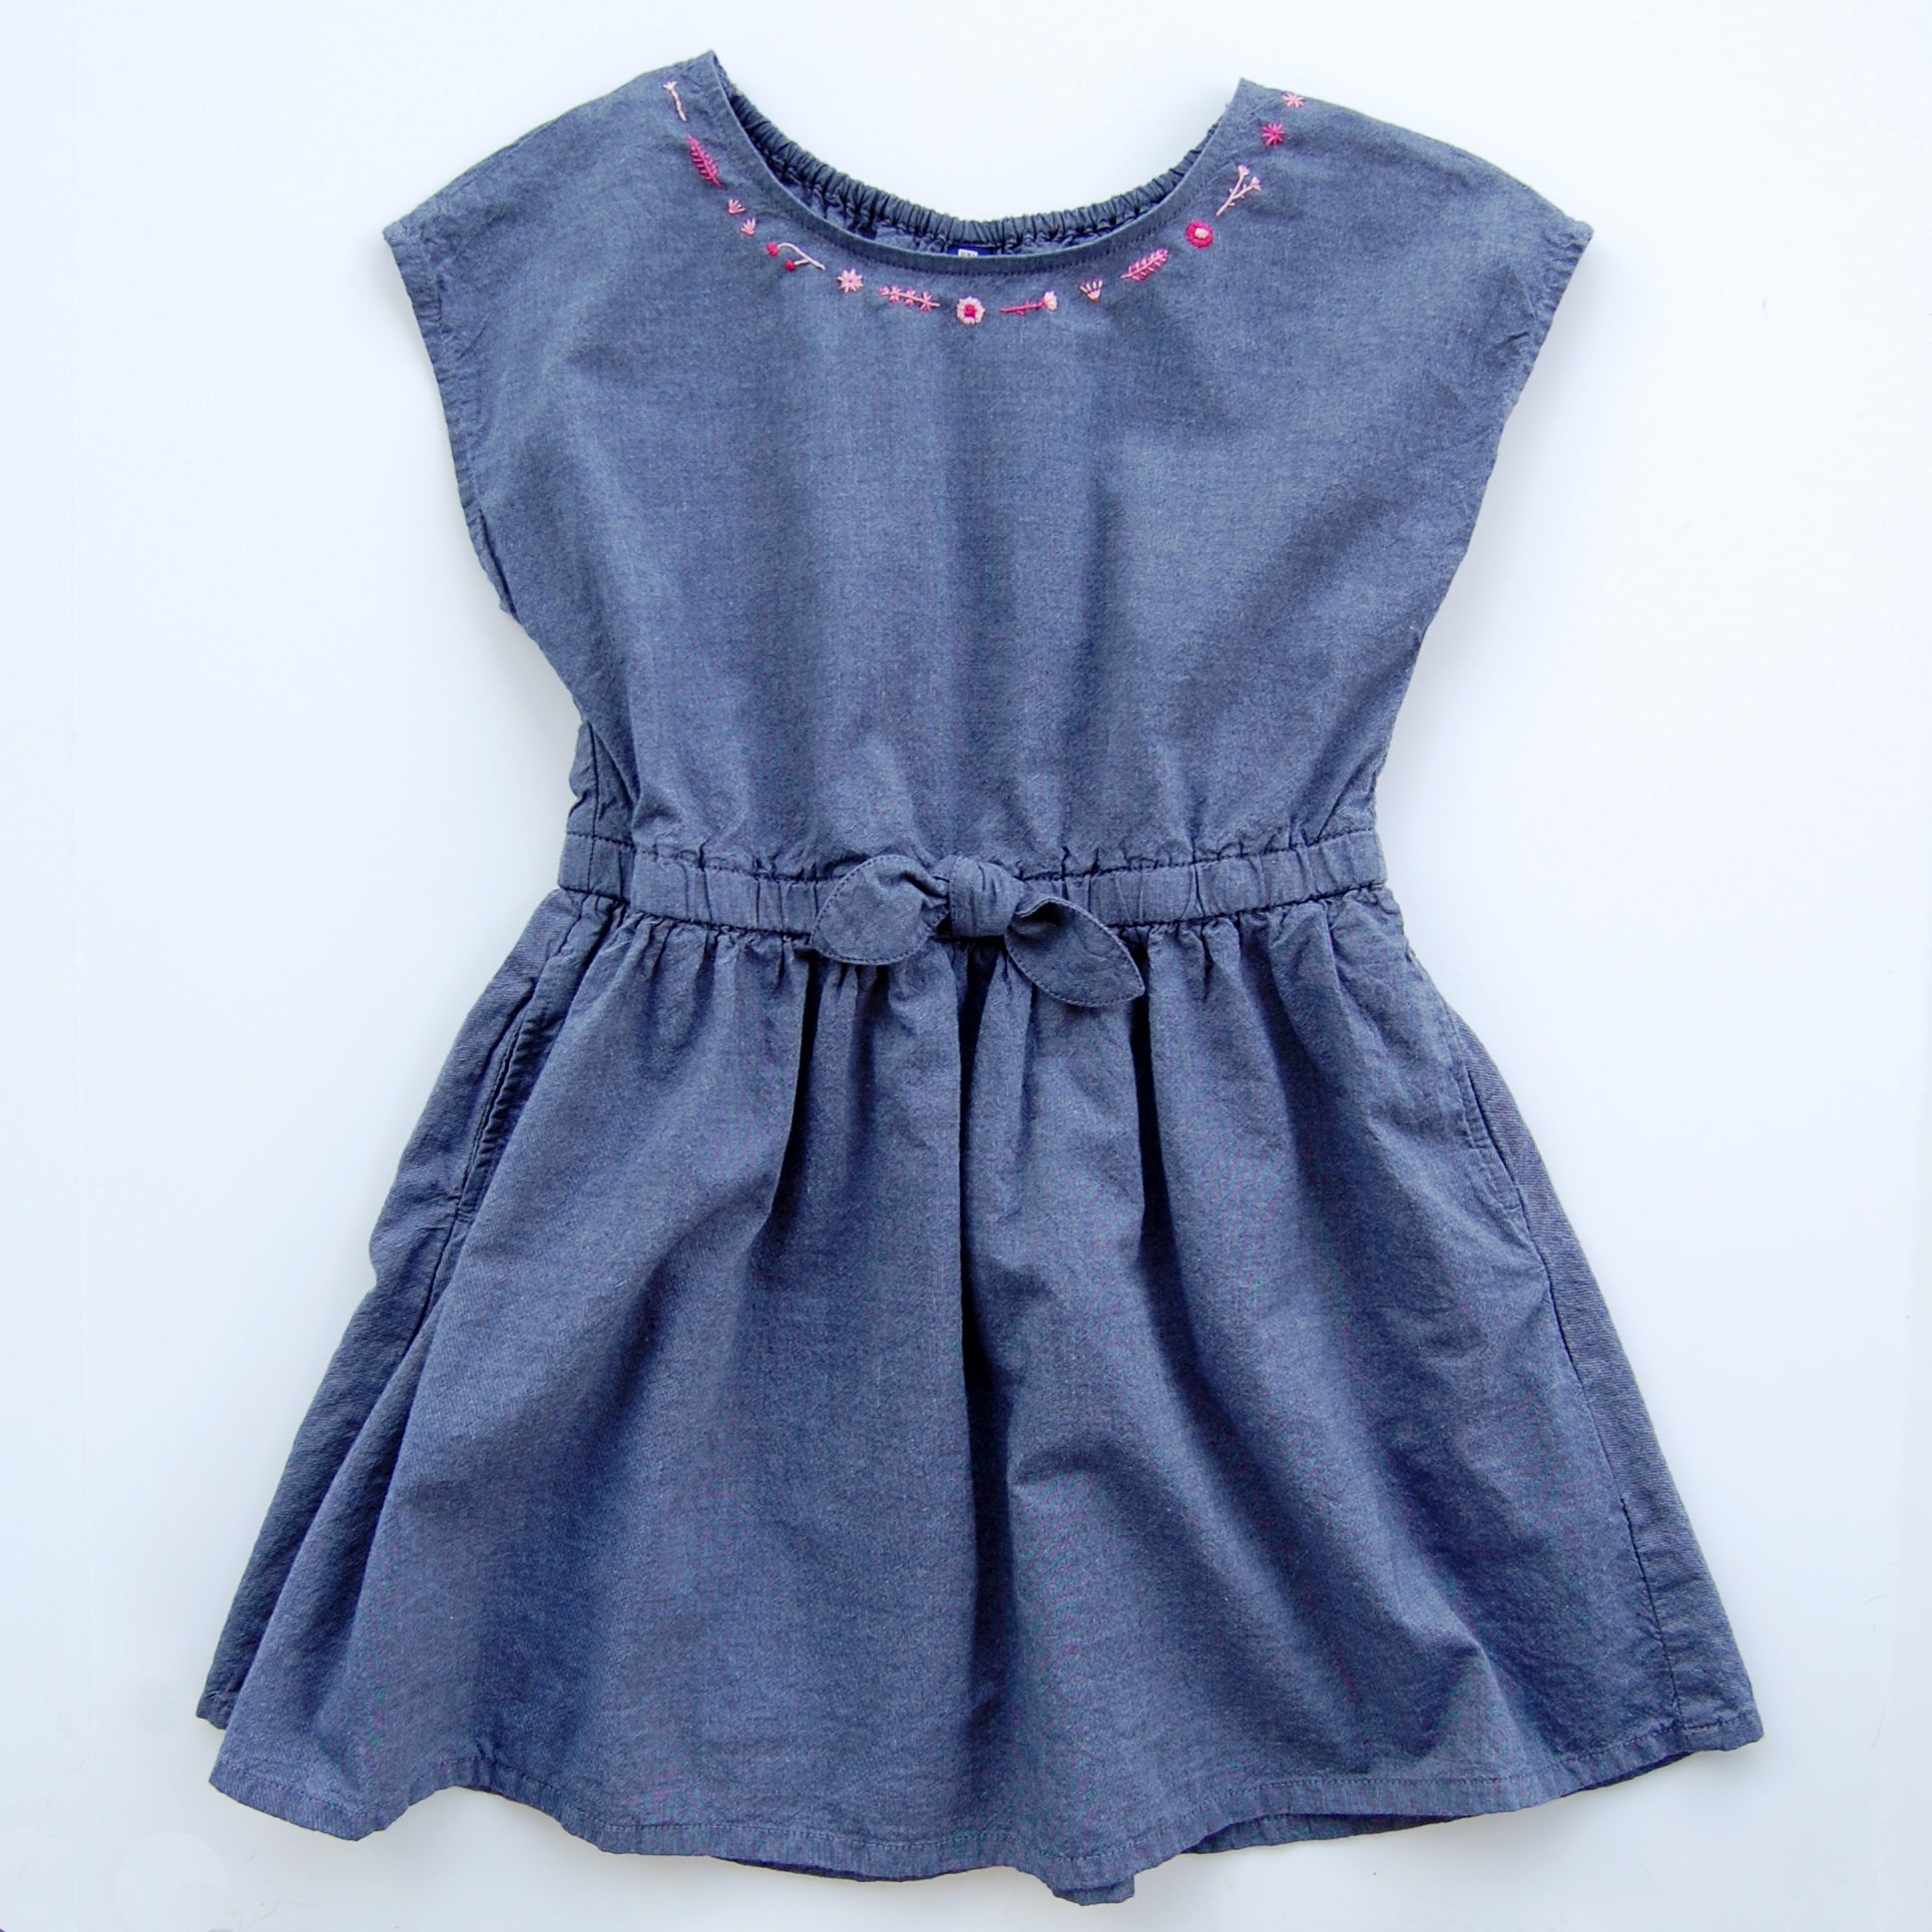 Girl's Embroidered Chambray Dress Pink Flowers (Size 3T-4T)